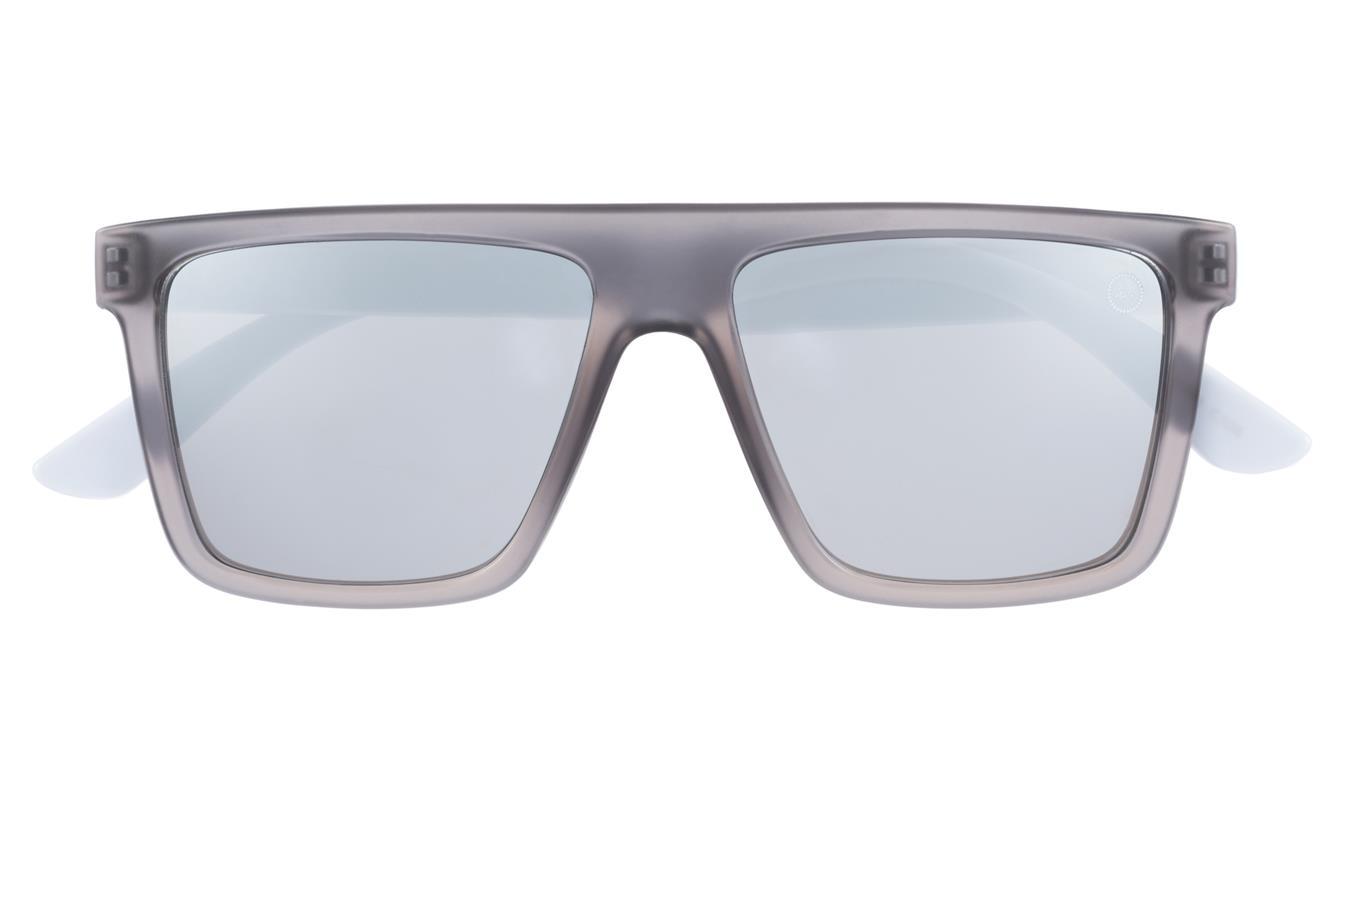 HYPE GREY JUSTHYPE HYPESQUARE SUNGLASSES